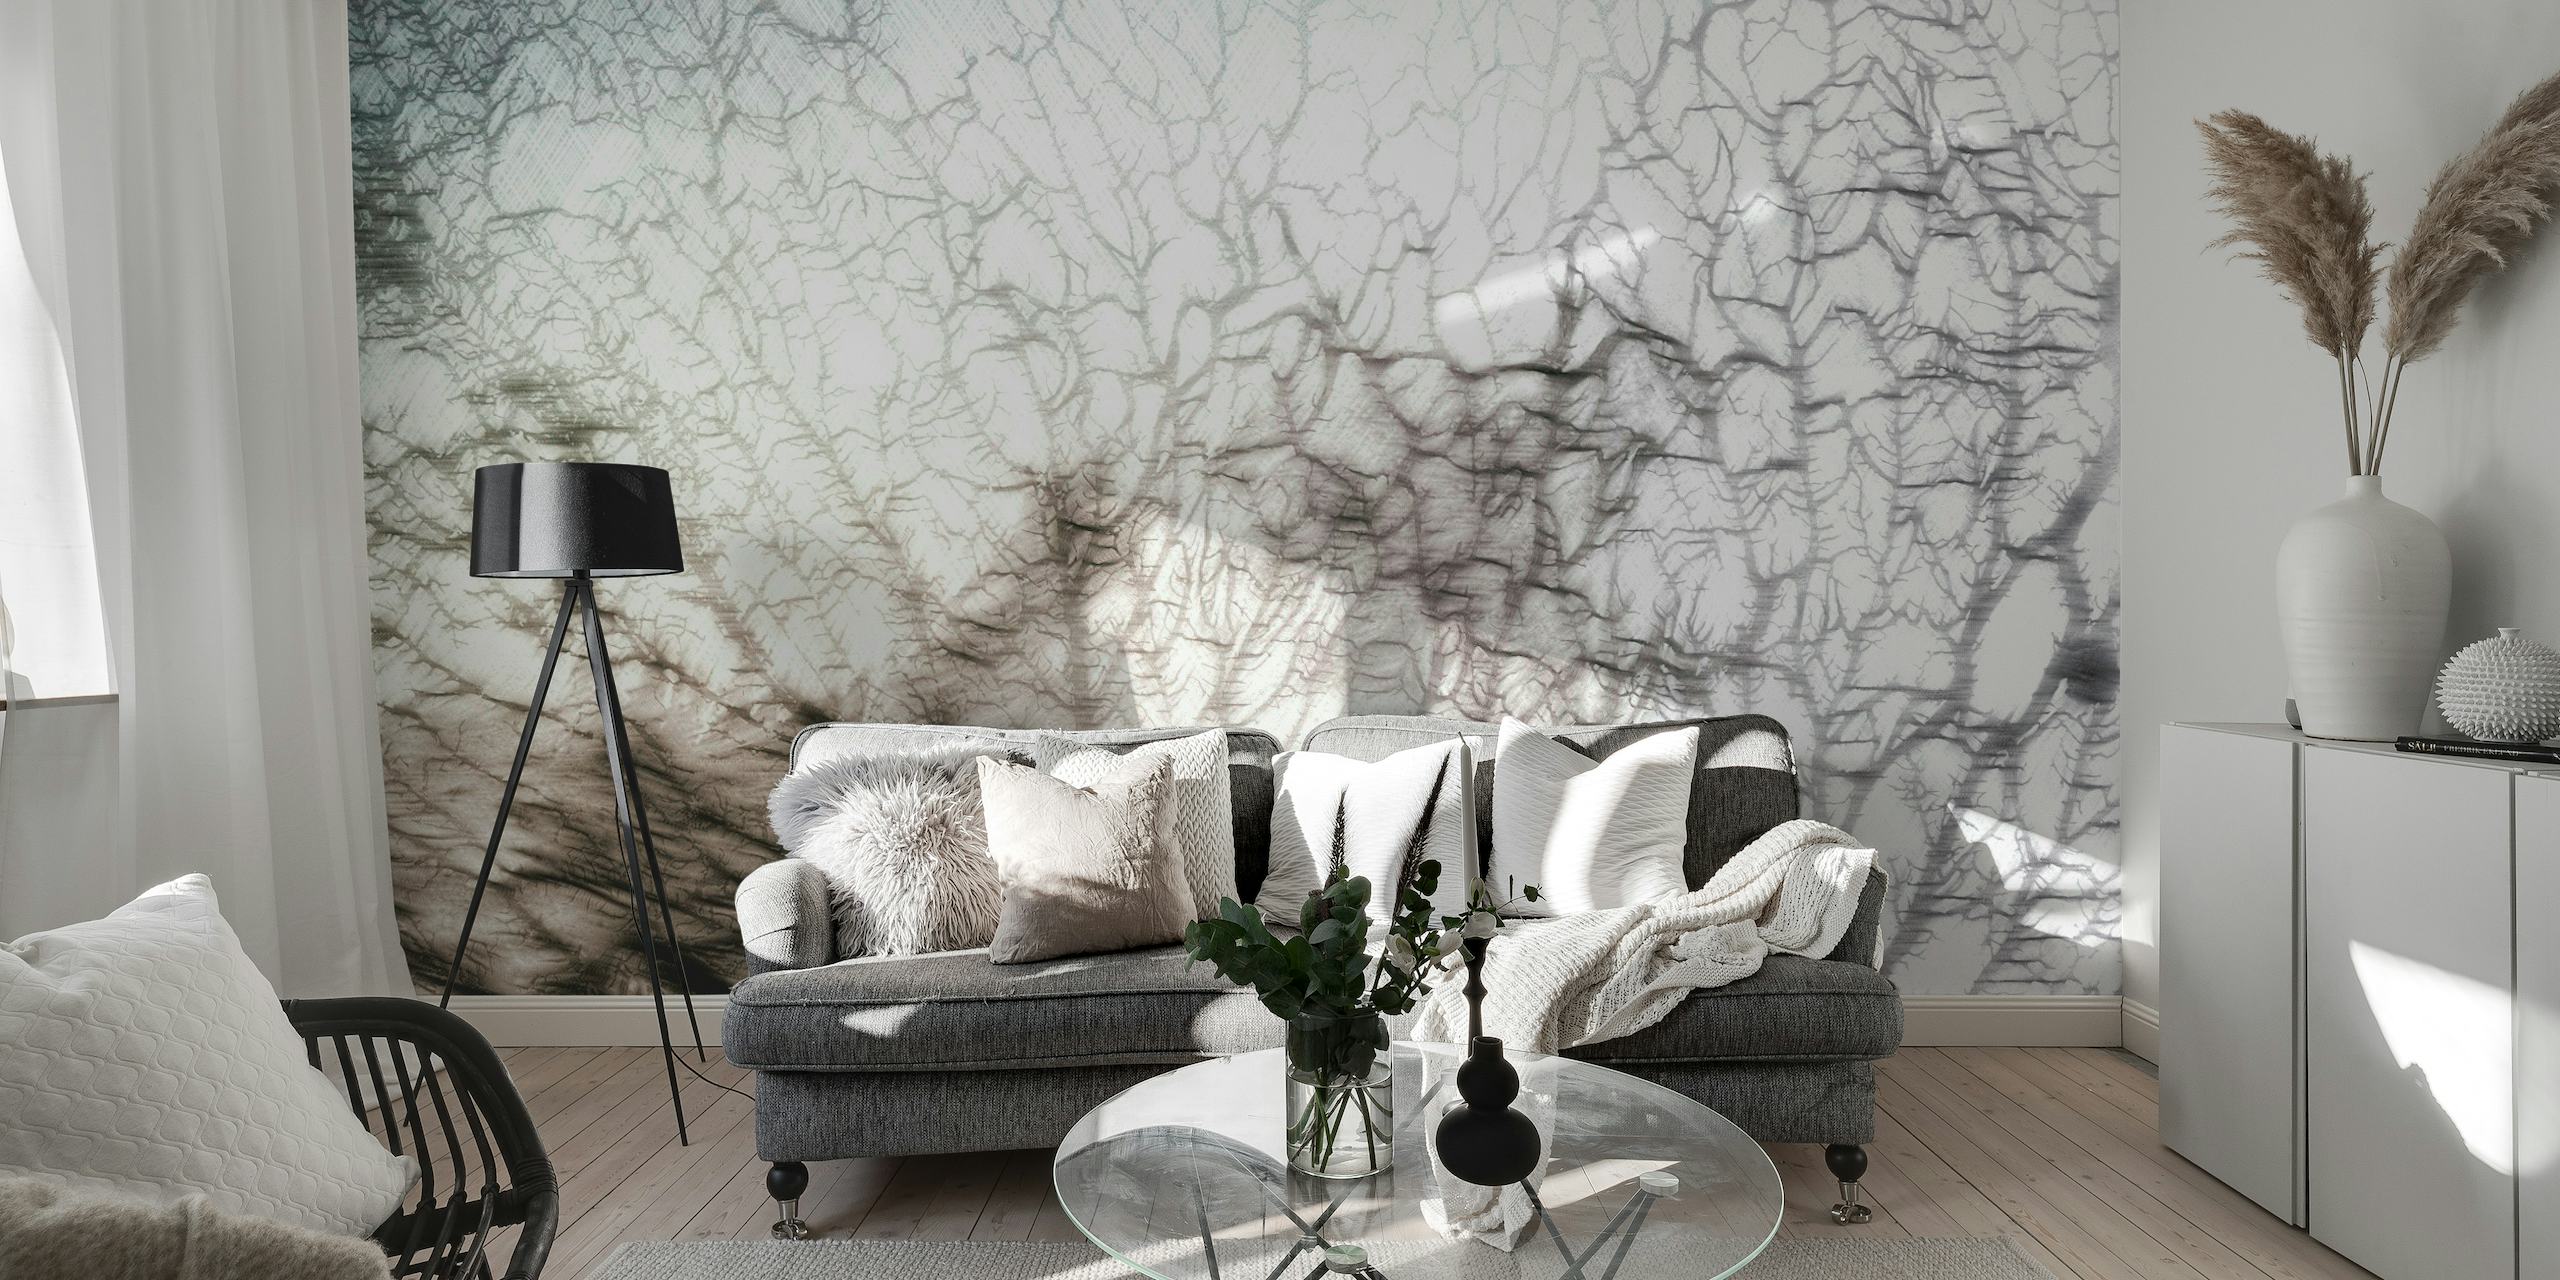 Monochrome coral reef wall mural with abstract design for home decor